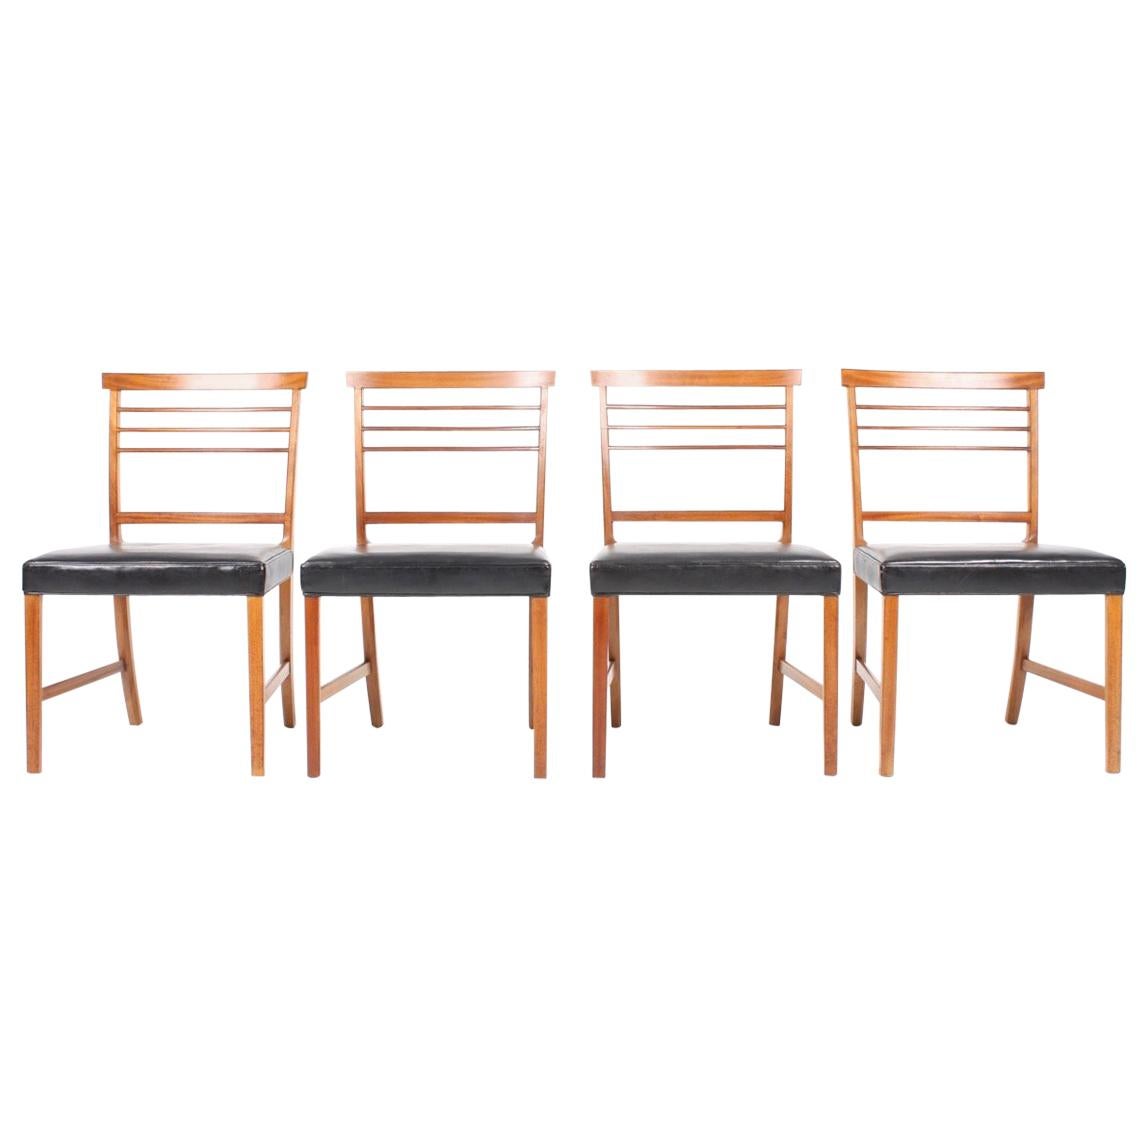 Set of Four Classic Side chairs by Ole Wanscher